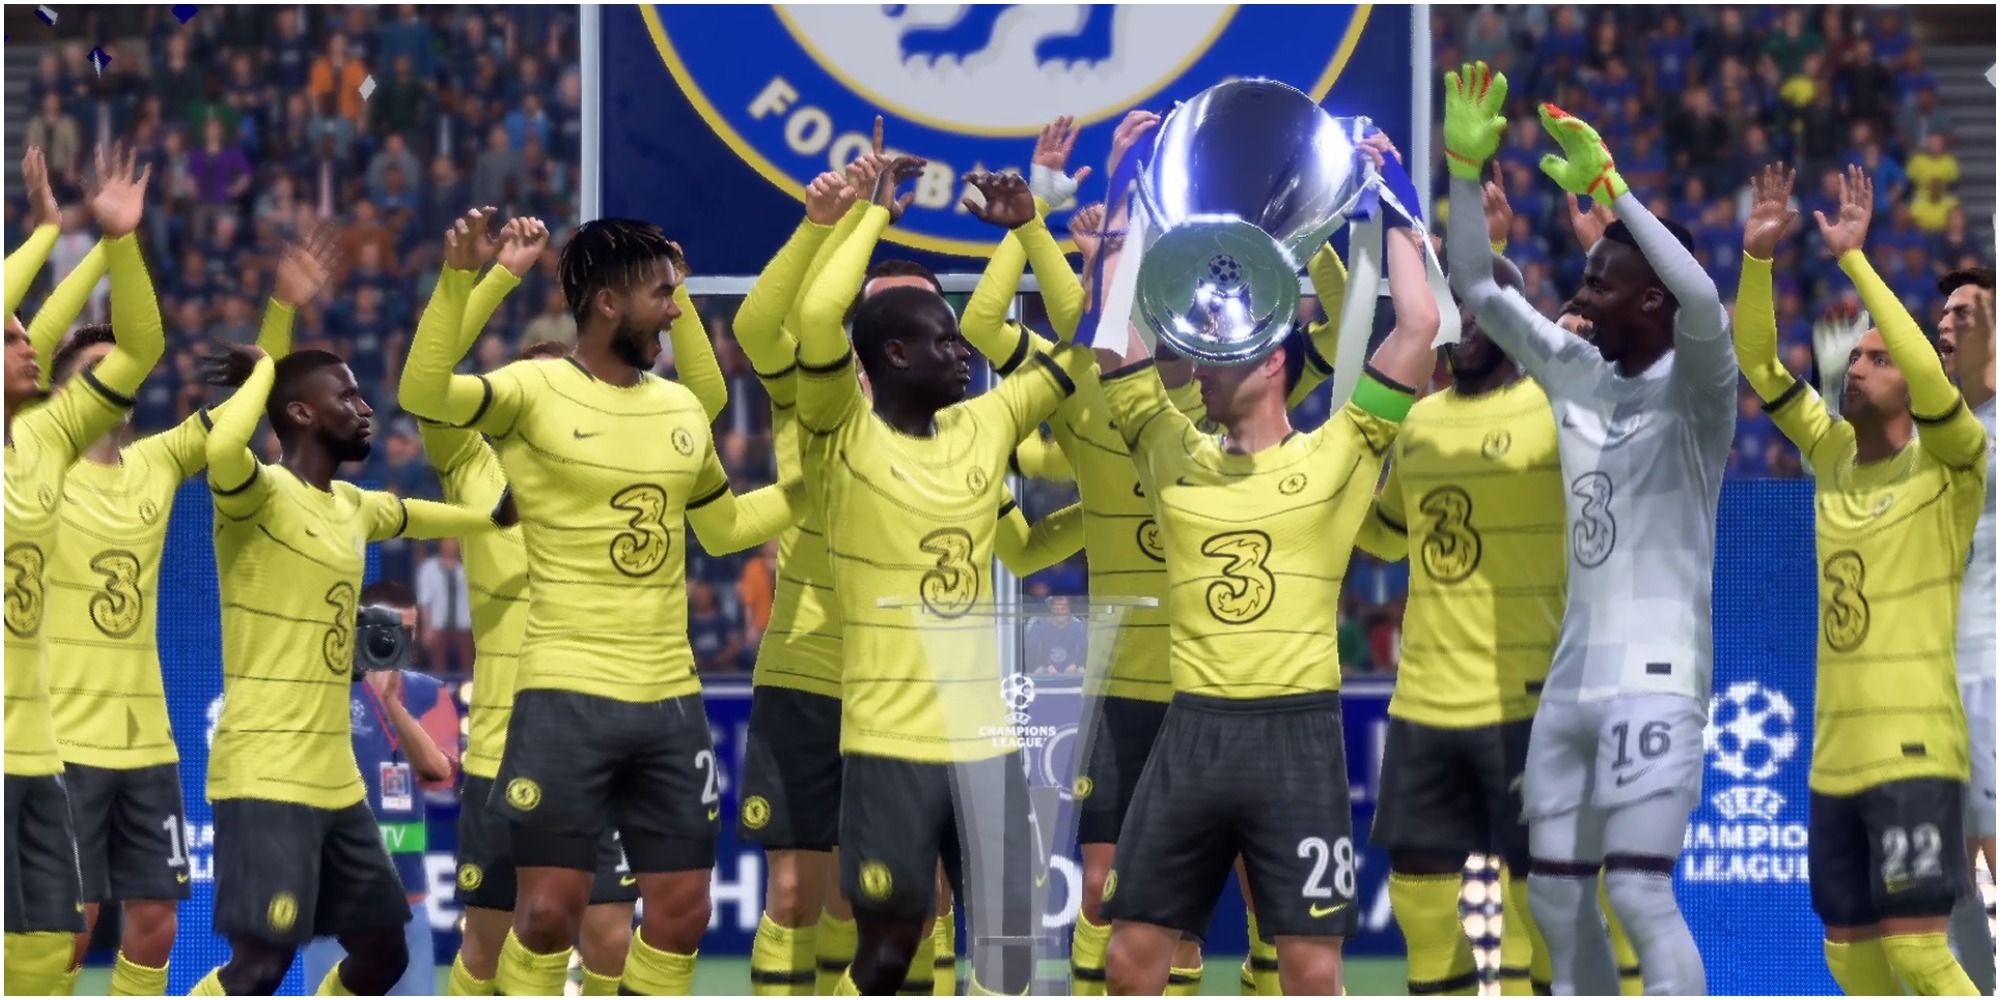 FIFA 22 Opening Sequence Of The Team Winning The Champion's League Cup